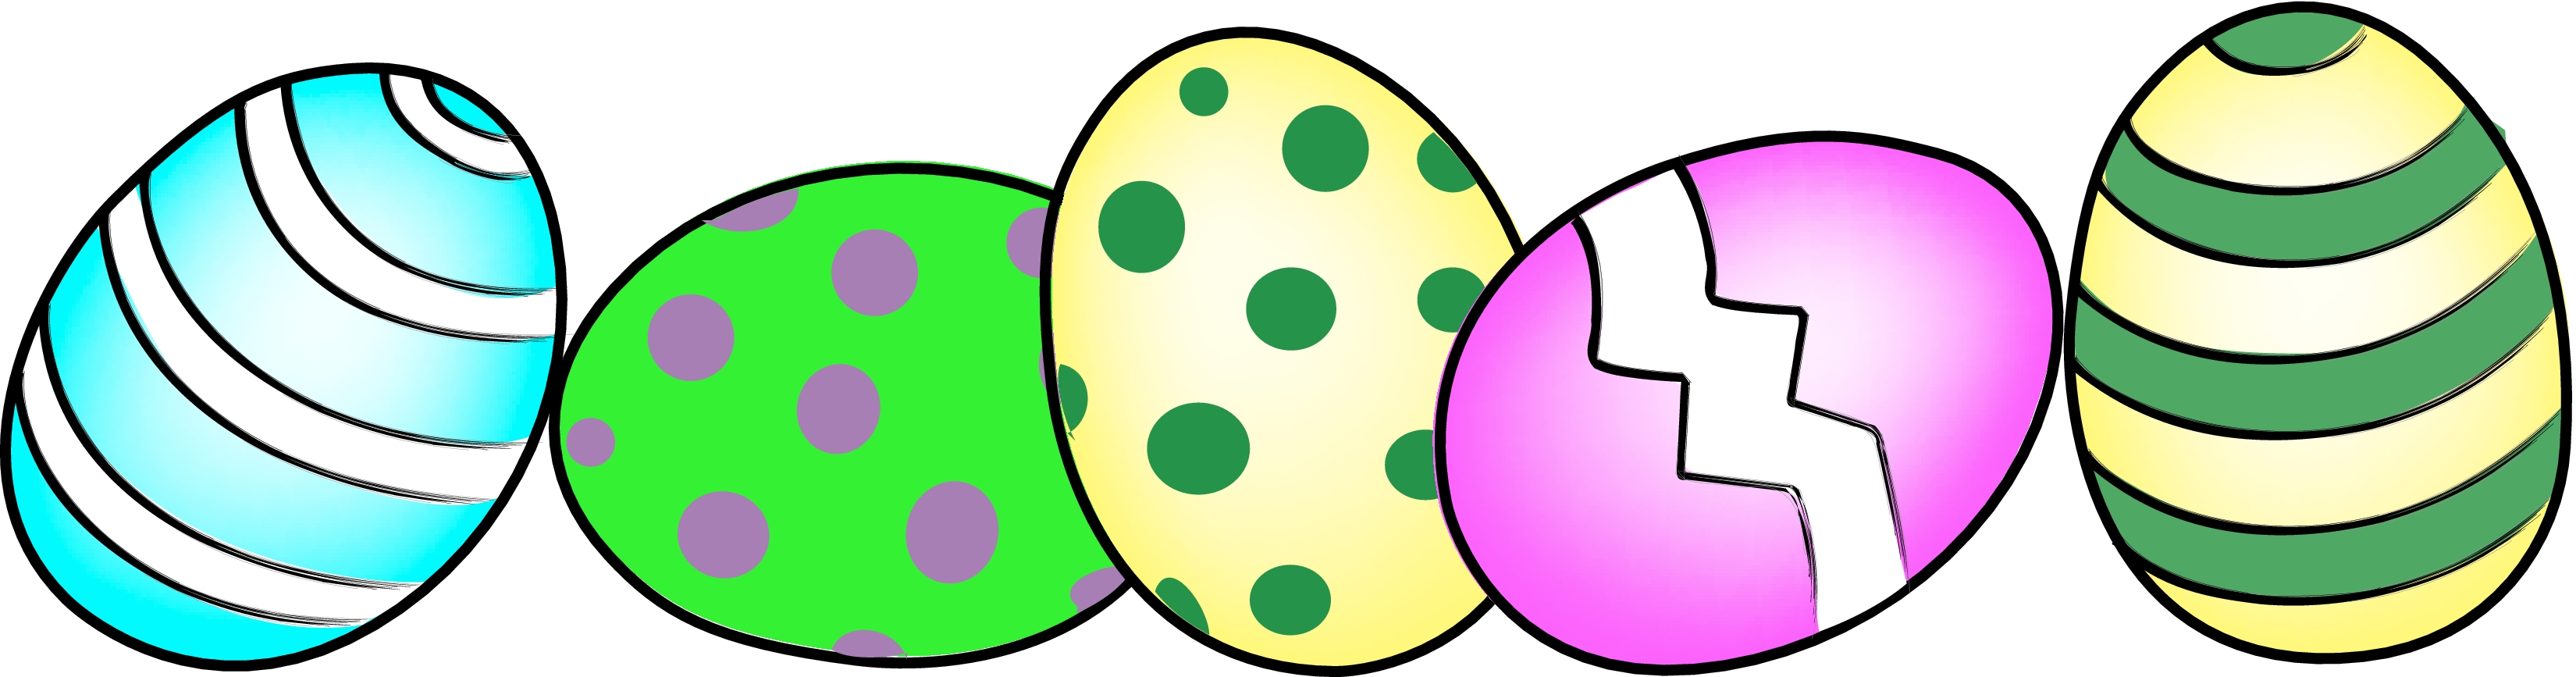 13052 Christian Easter free clipart.